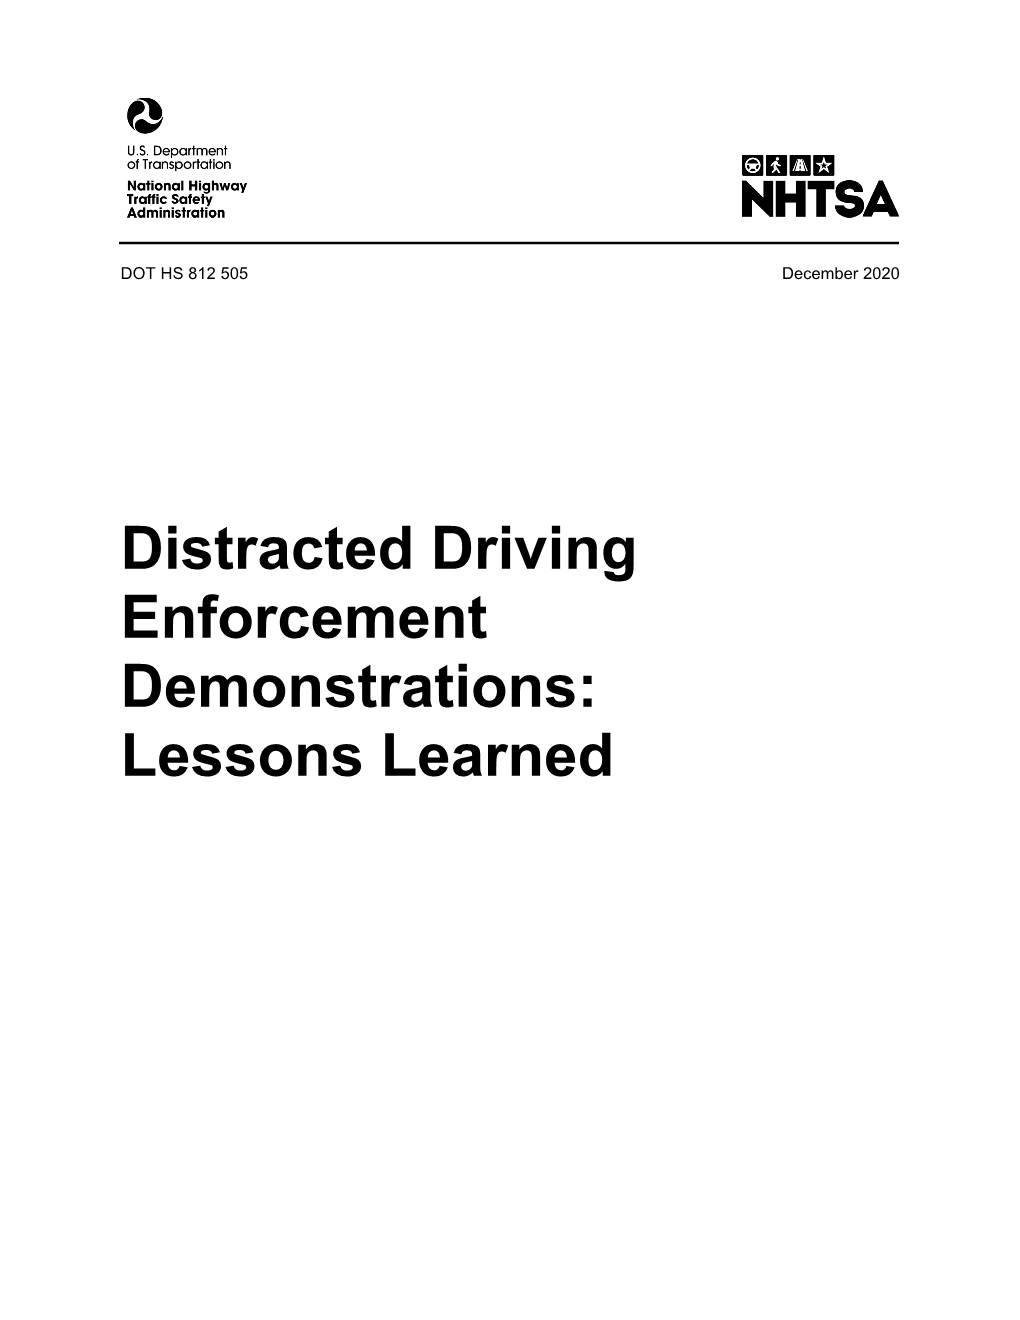 Distracted Driving Enforcement Demonstrations: Lessons Learned DISCLAIMER